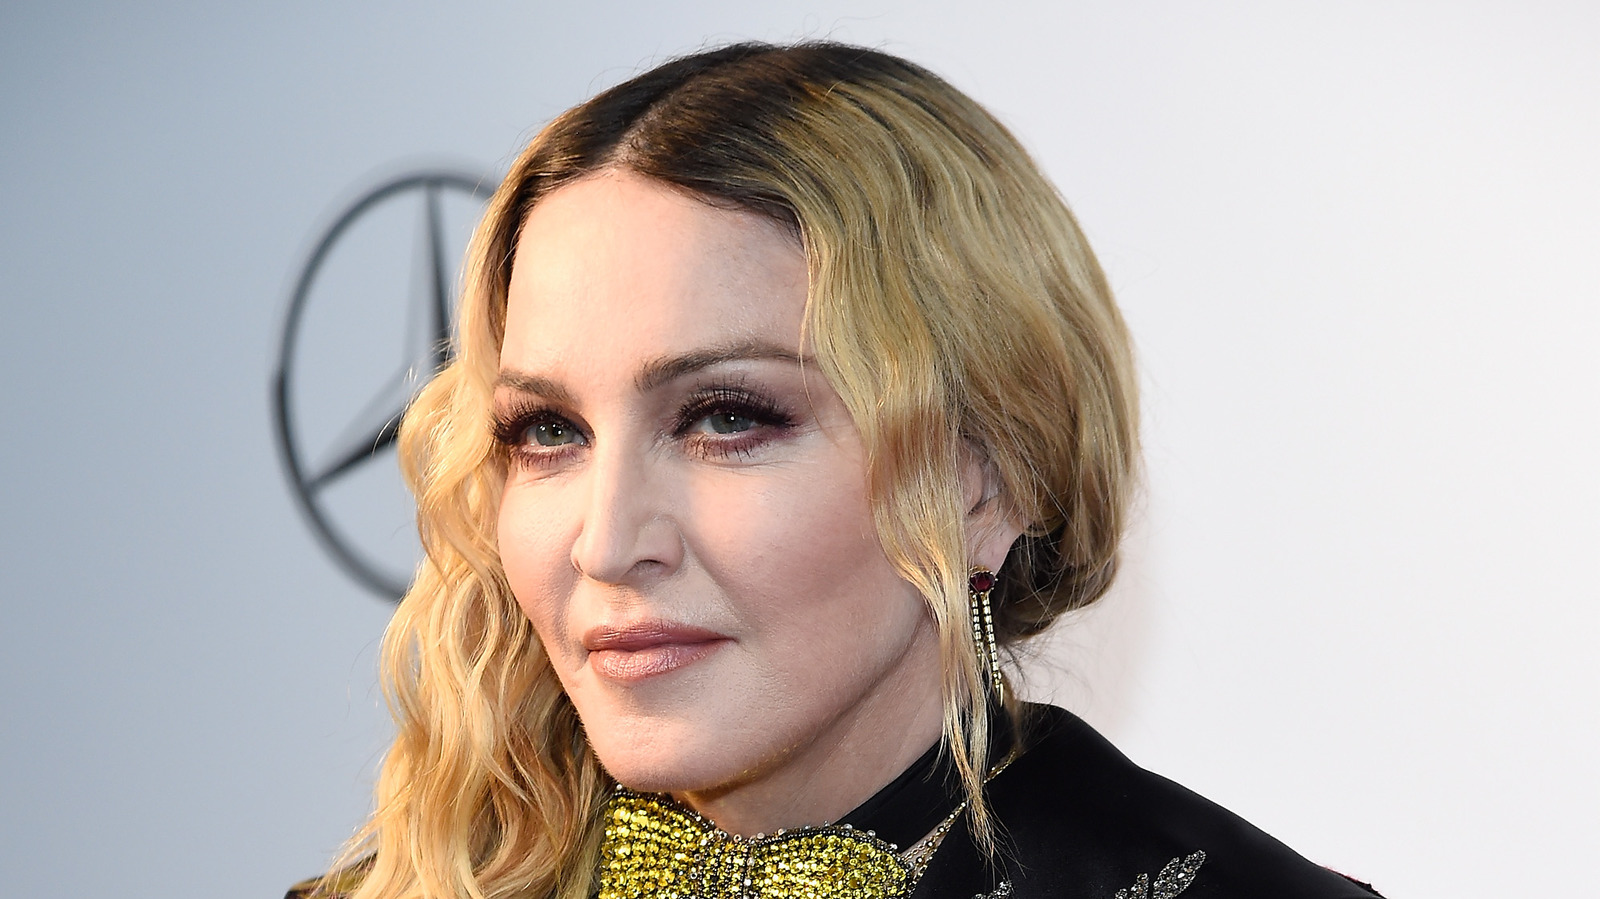 The Real Meaning Behind Madonna's New Tattoo